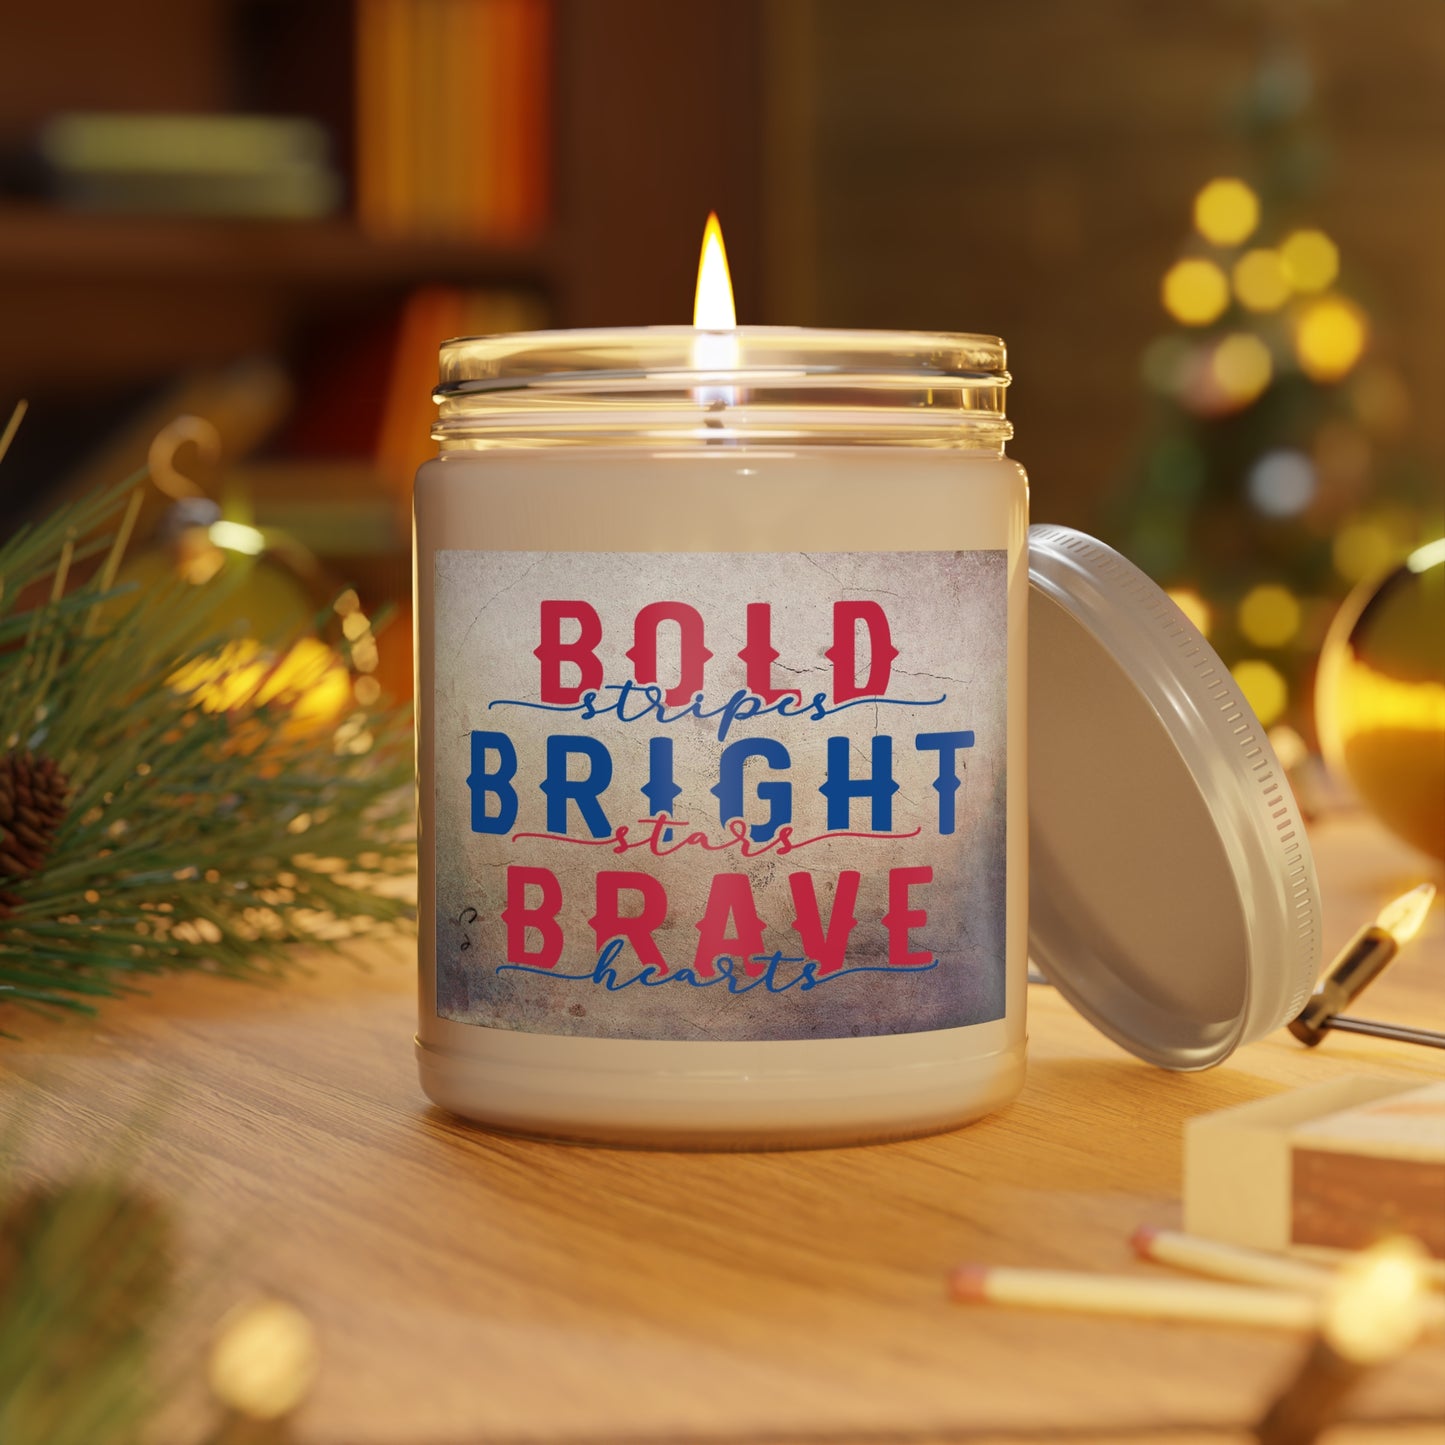 Bold Bright Brave Scented Candle